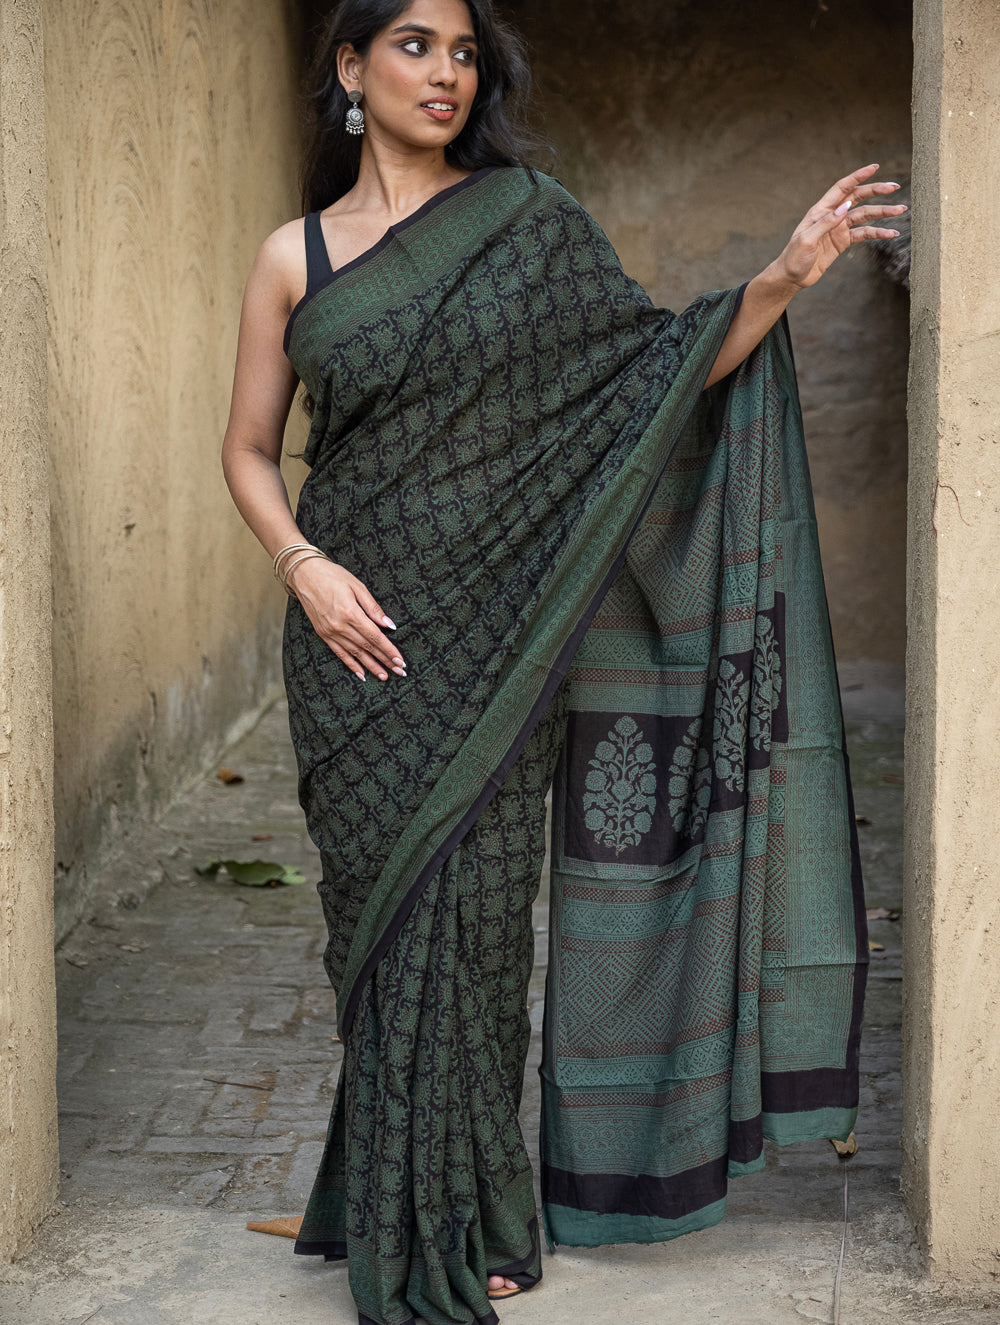 Load image into Gallery viewer, Exclusive Bagh Hand Block Printed Cotton Saree - Ornate Floral